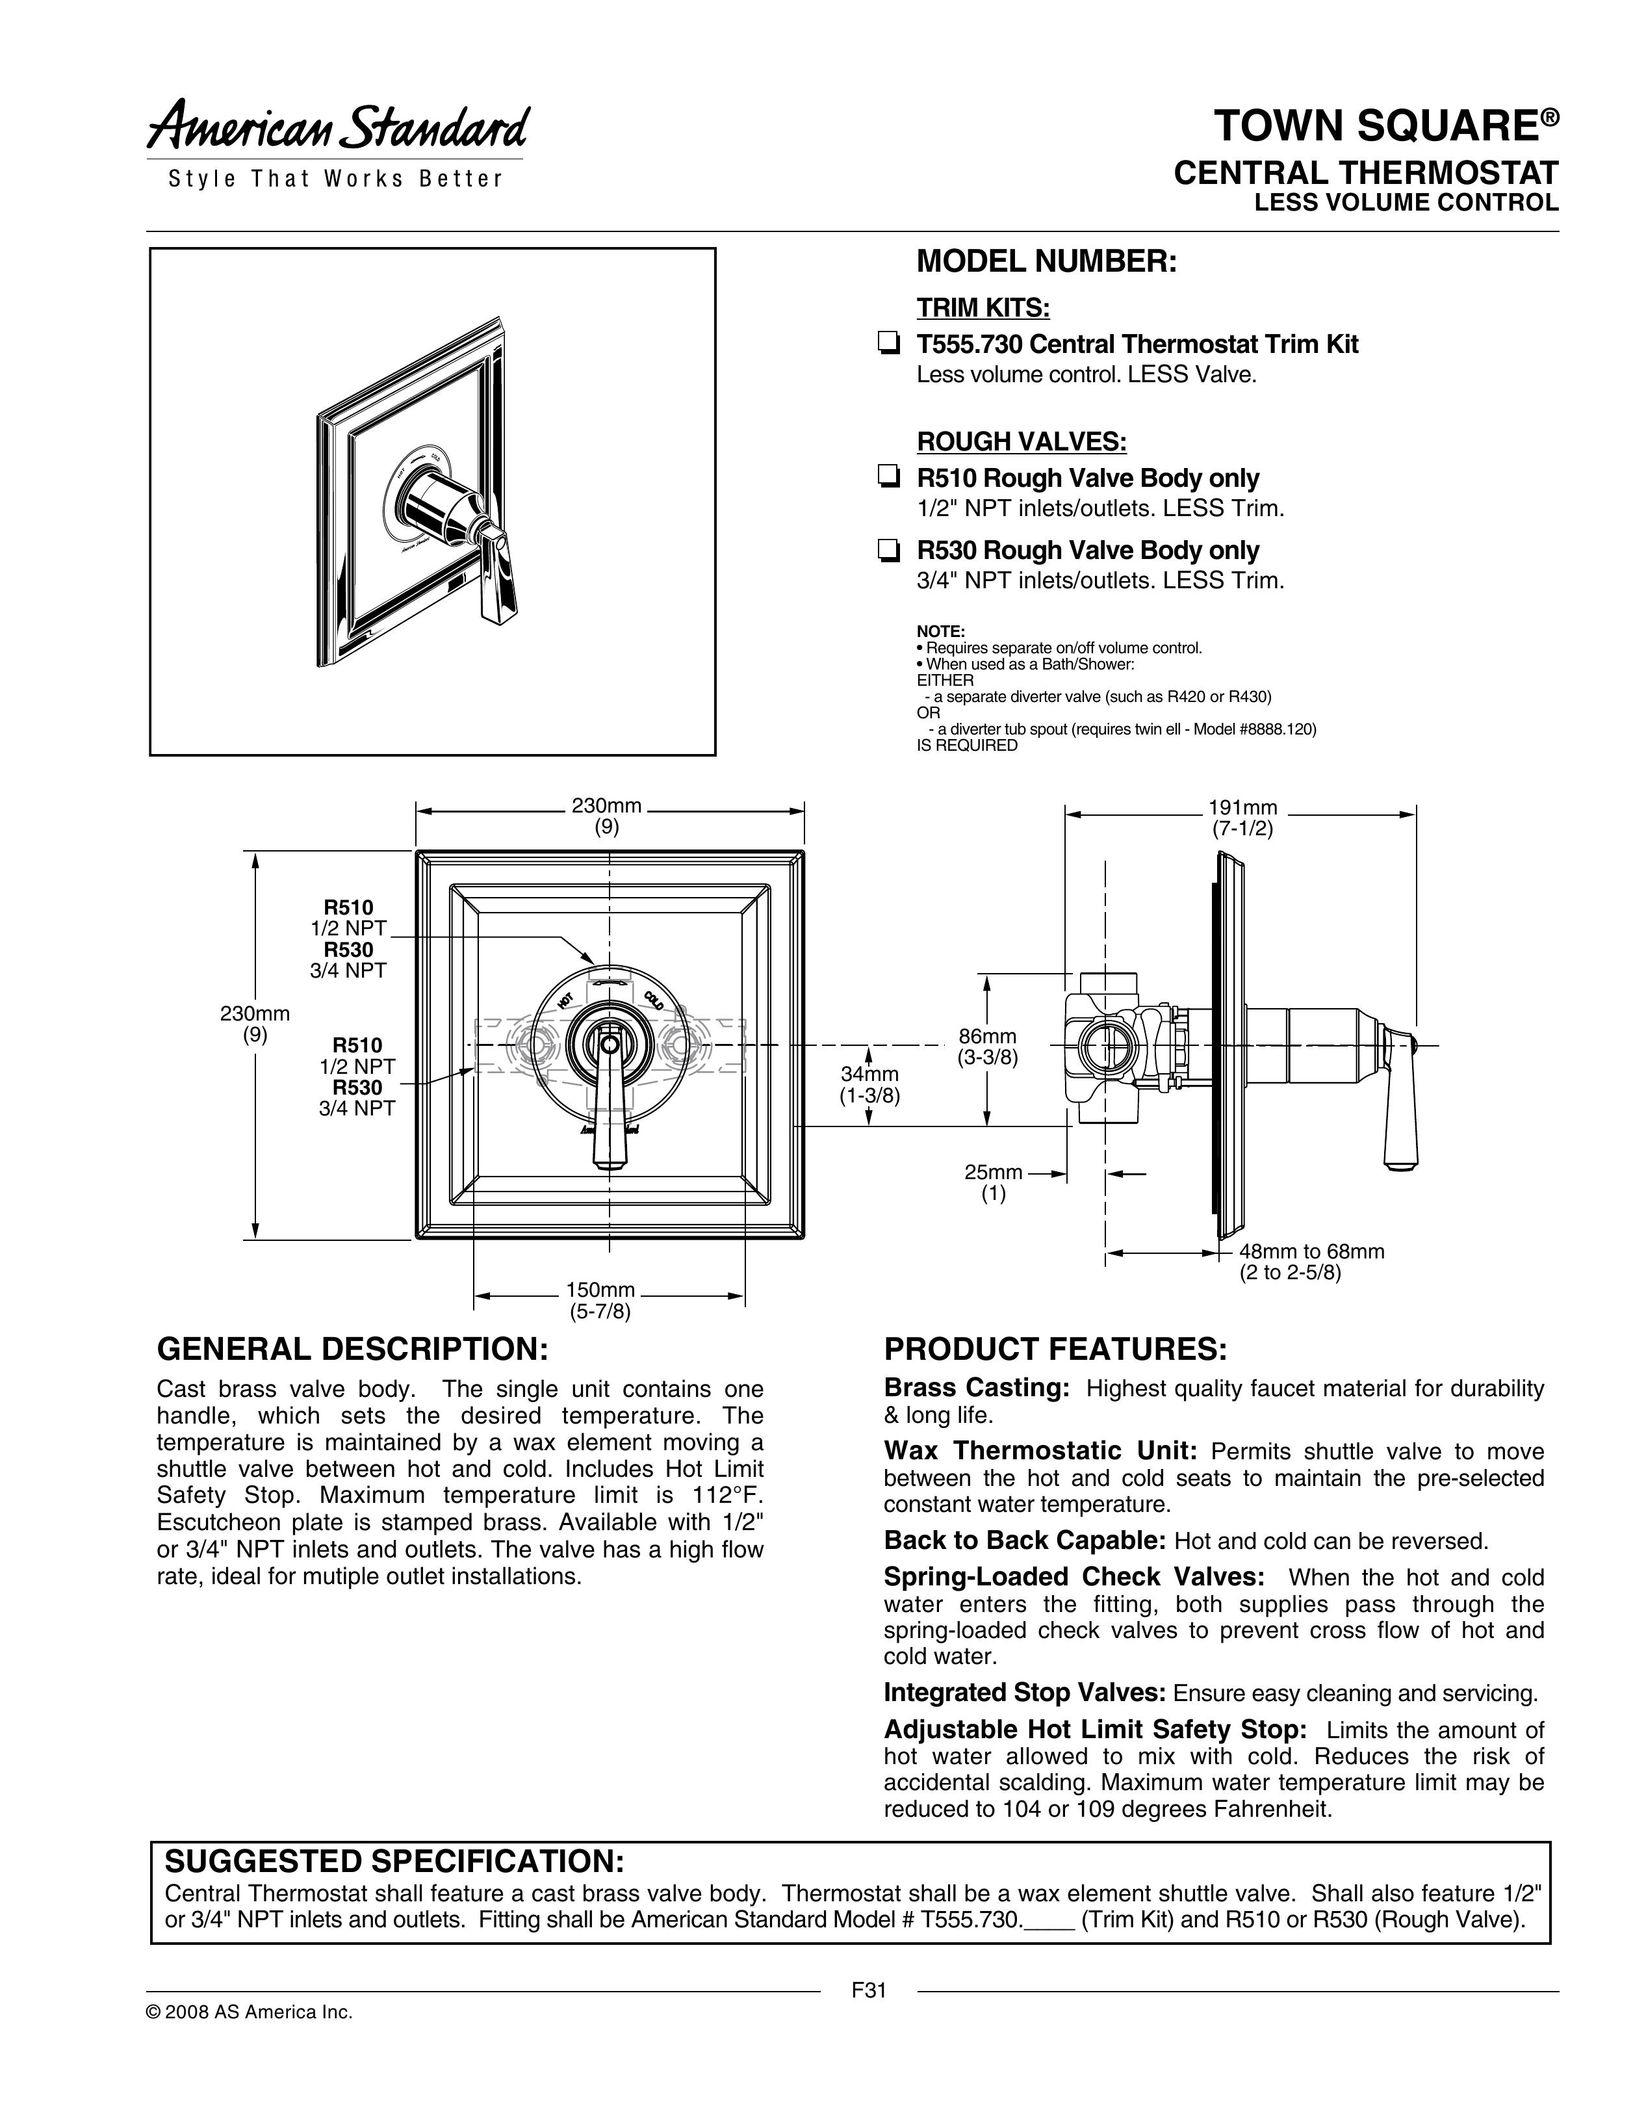 American Standard T555.730 Thermostat User Manual